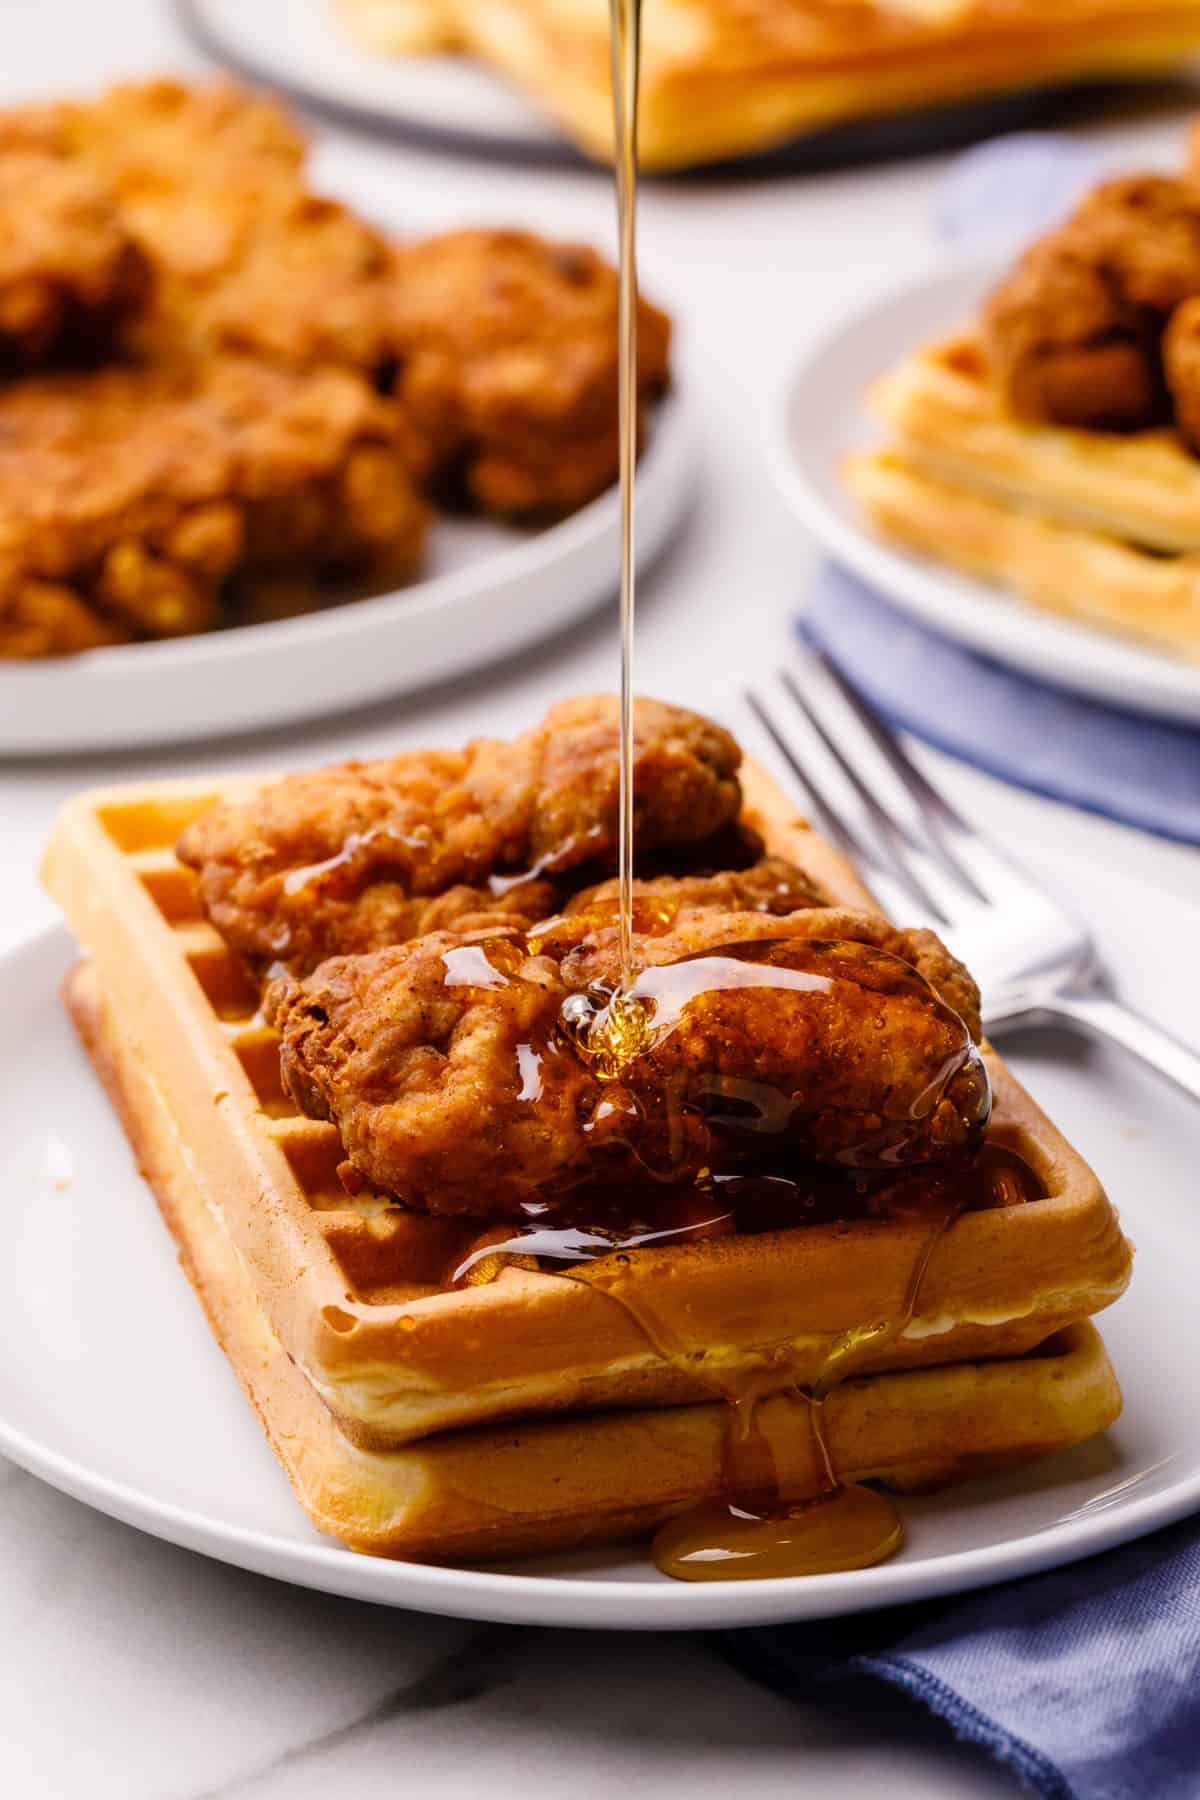 chicken and waffles with syrup being poured on and served on a white round plate with a silver fork